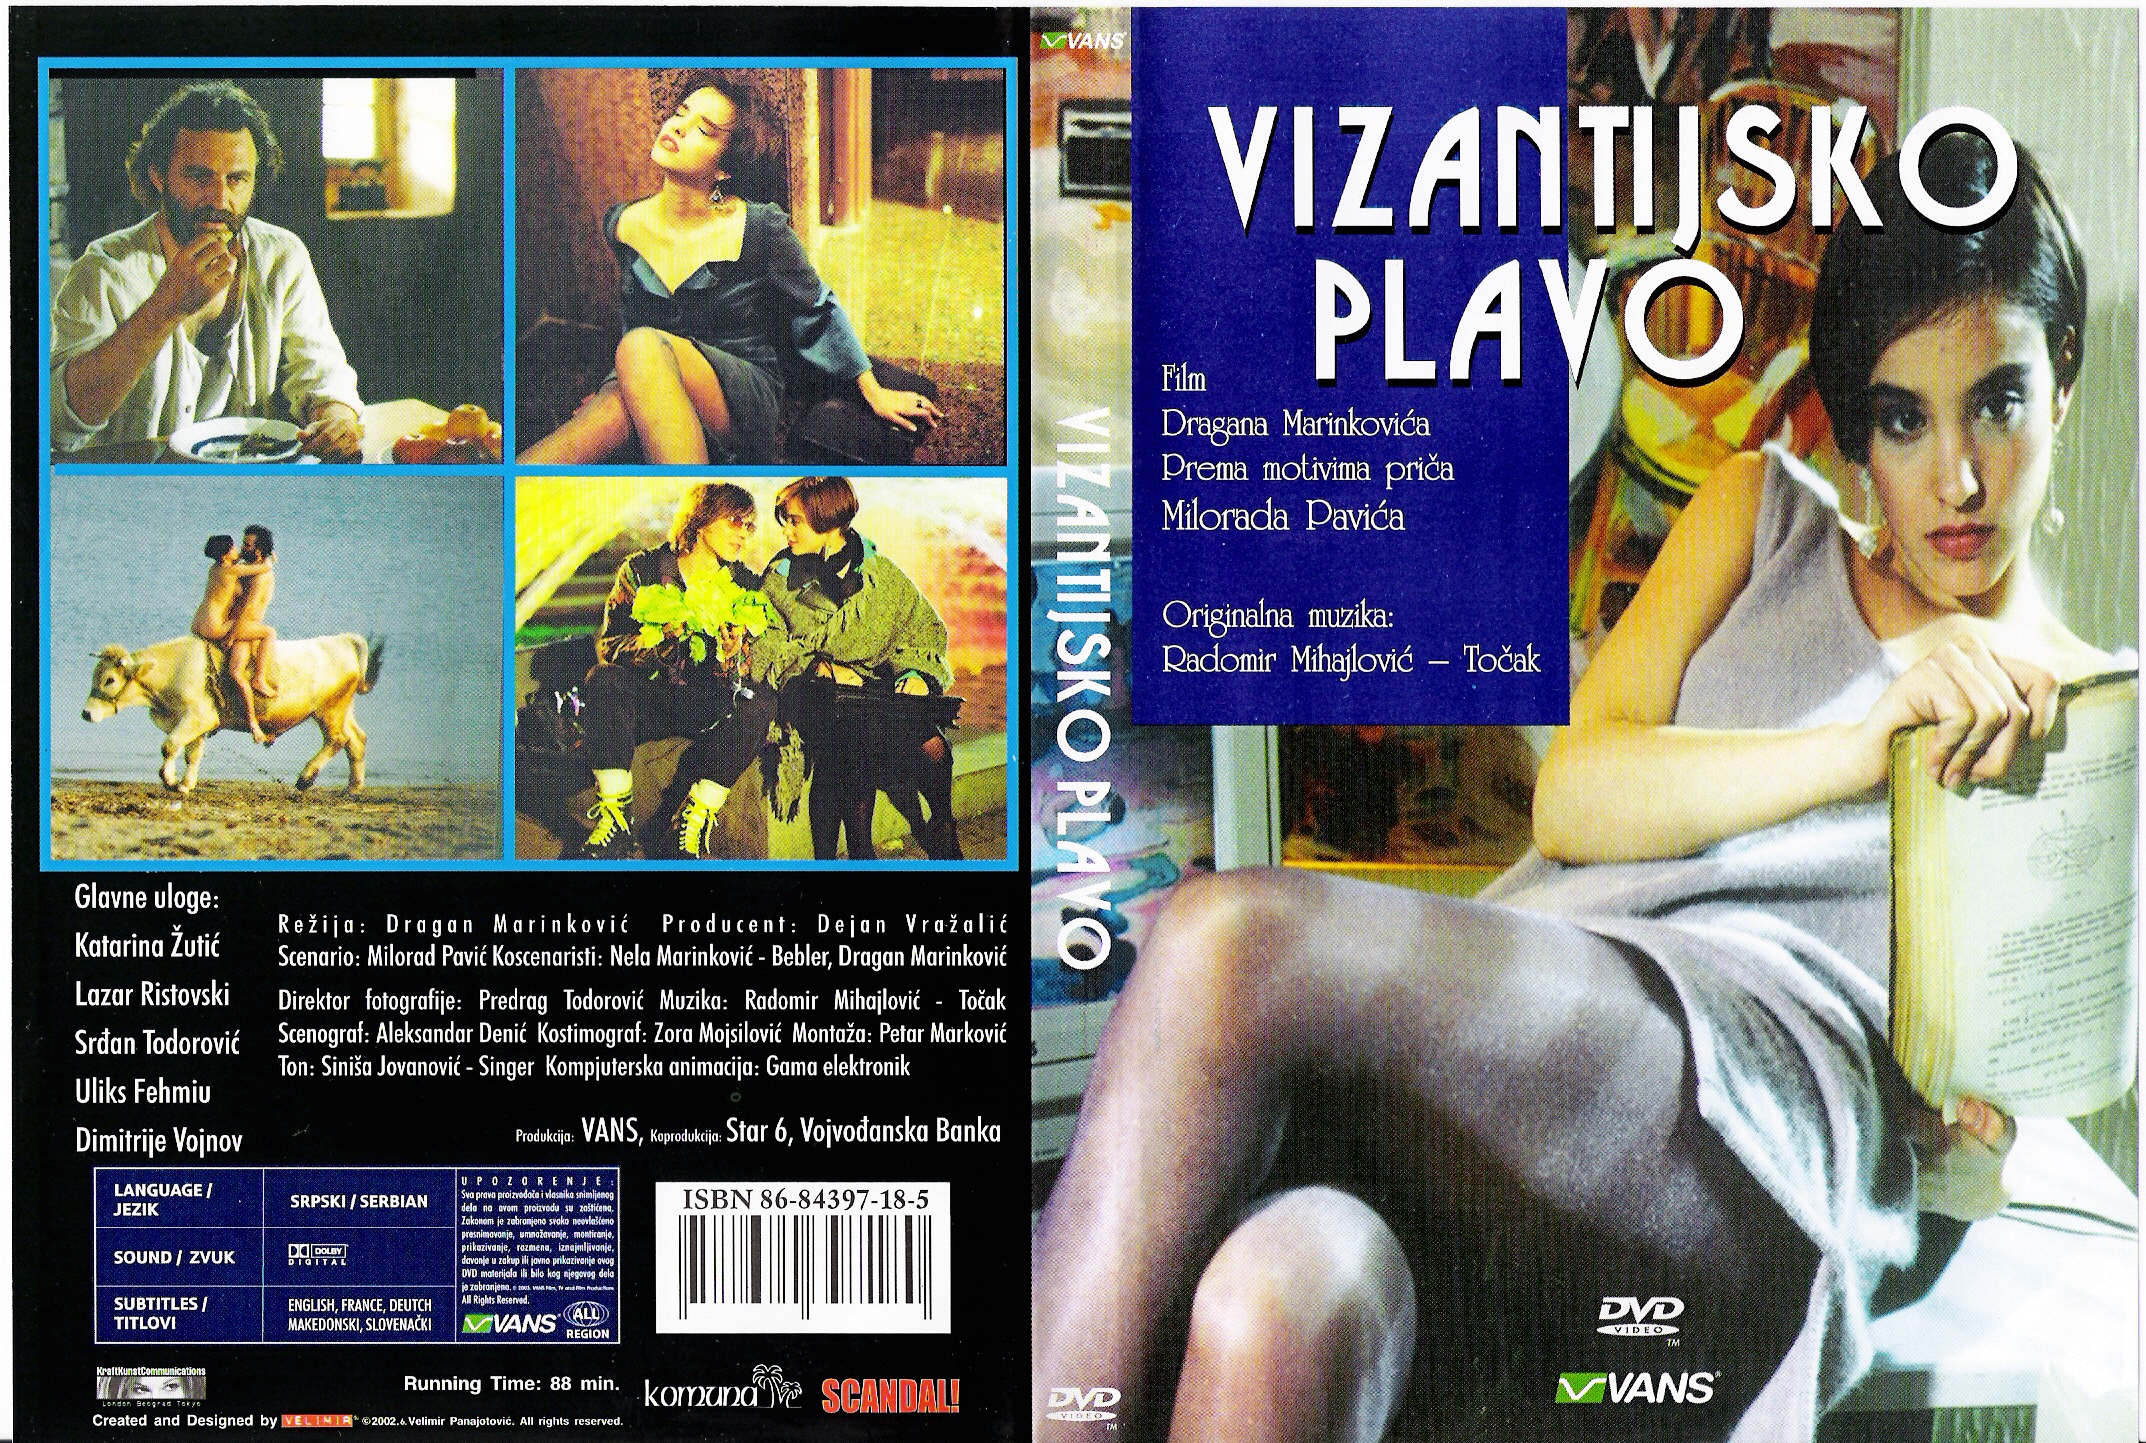 Click to view full size image -  DVD Cover - V - DVD - VIZANTIJSKO PLAVO - DVD - VIZANTIJSKO PLAVO.jpg